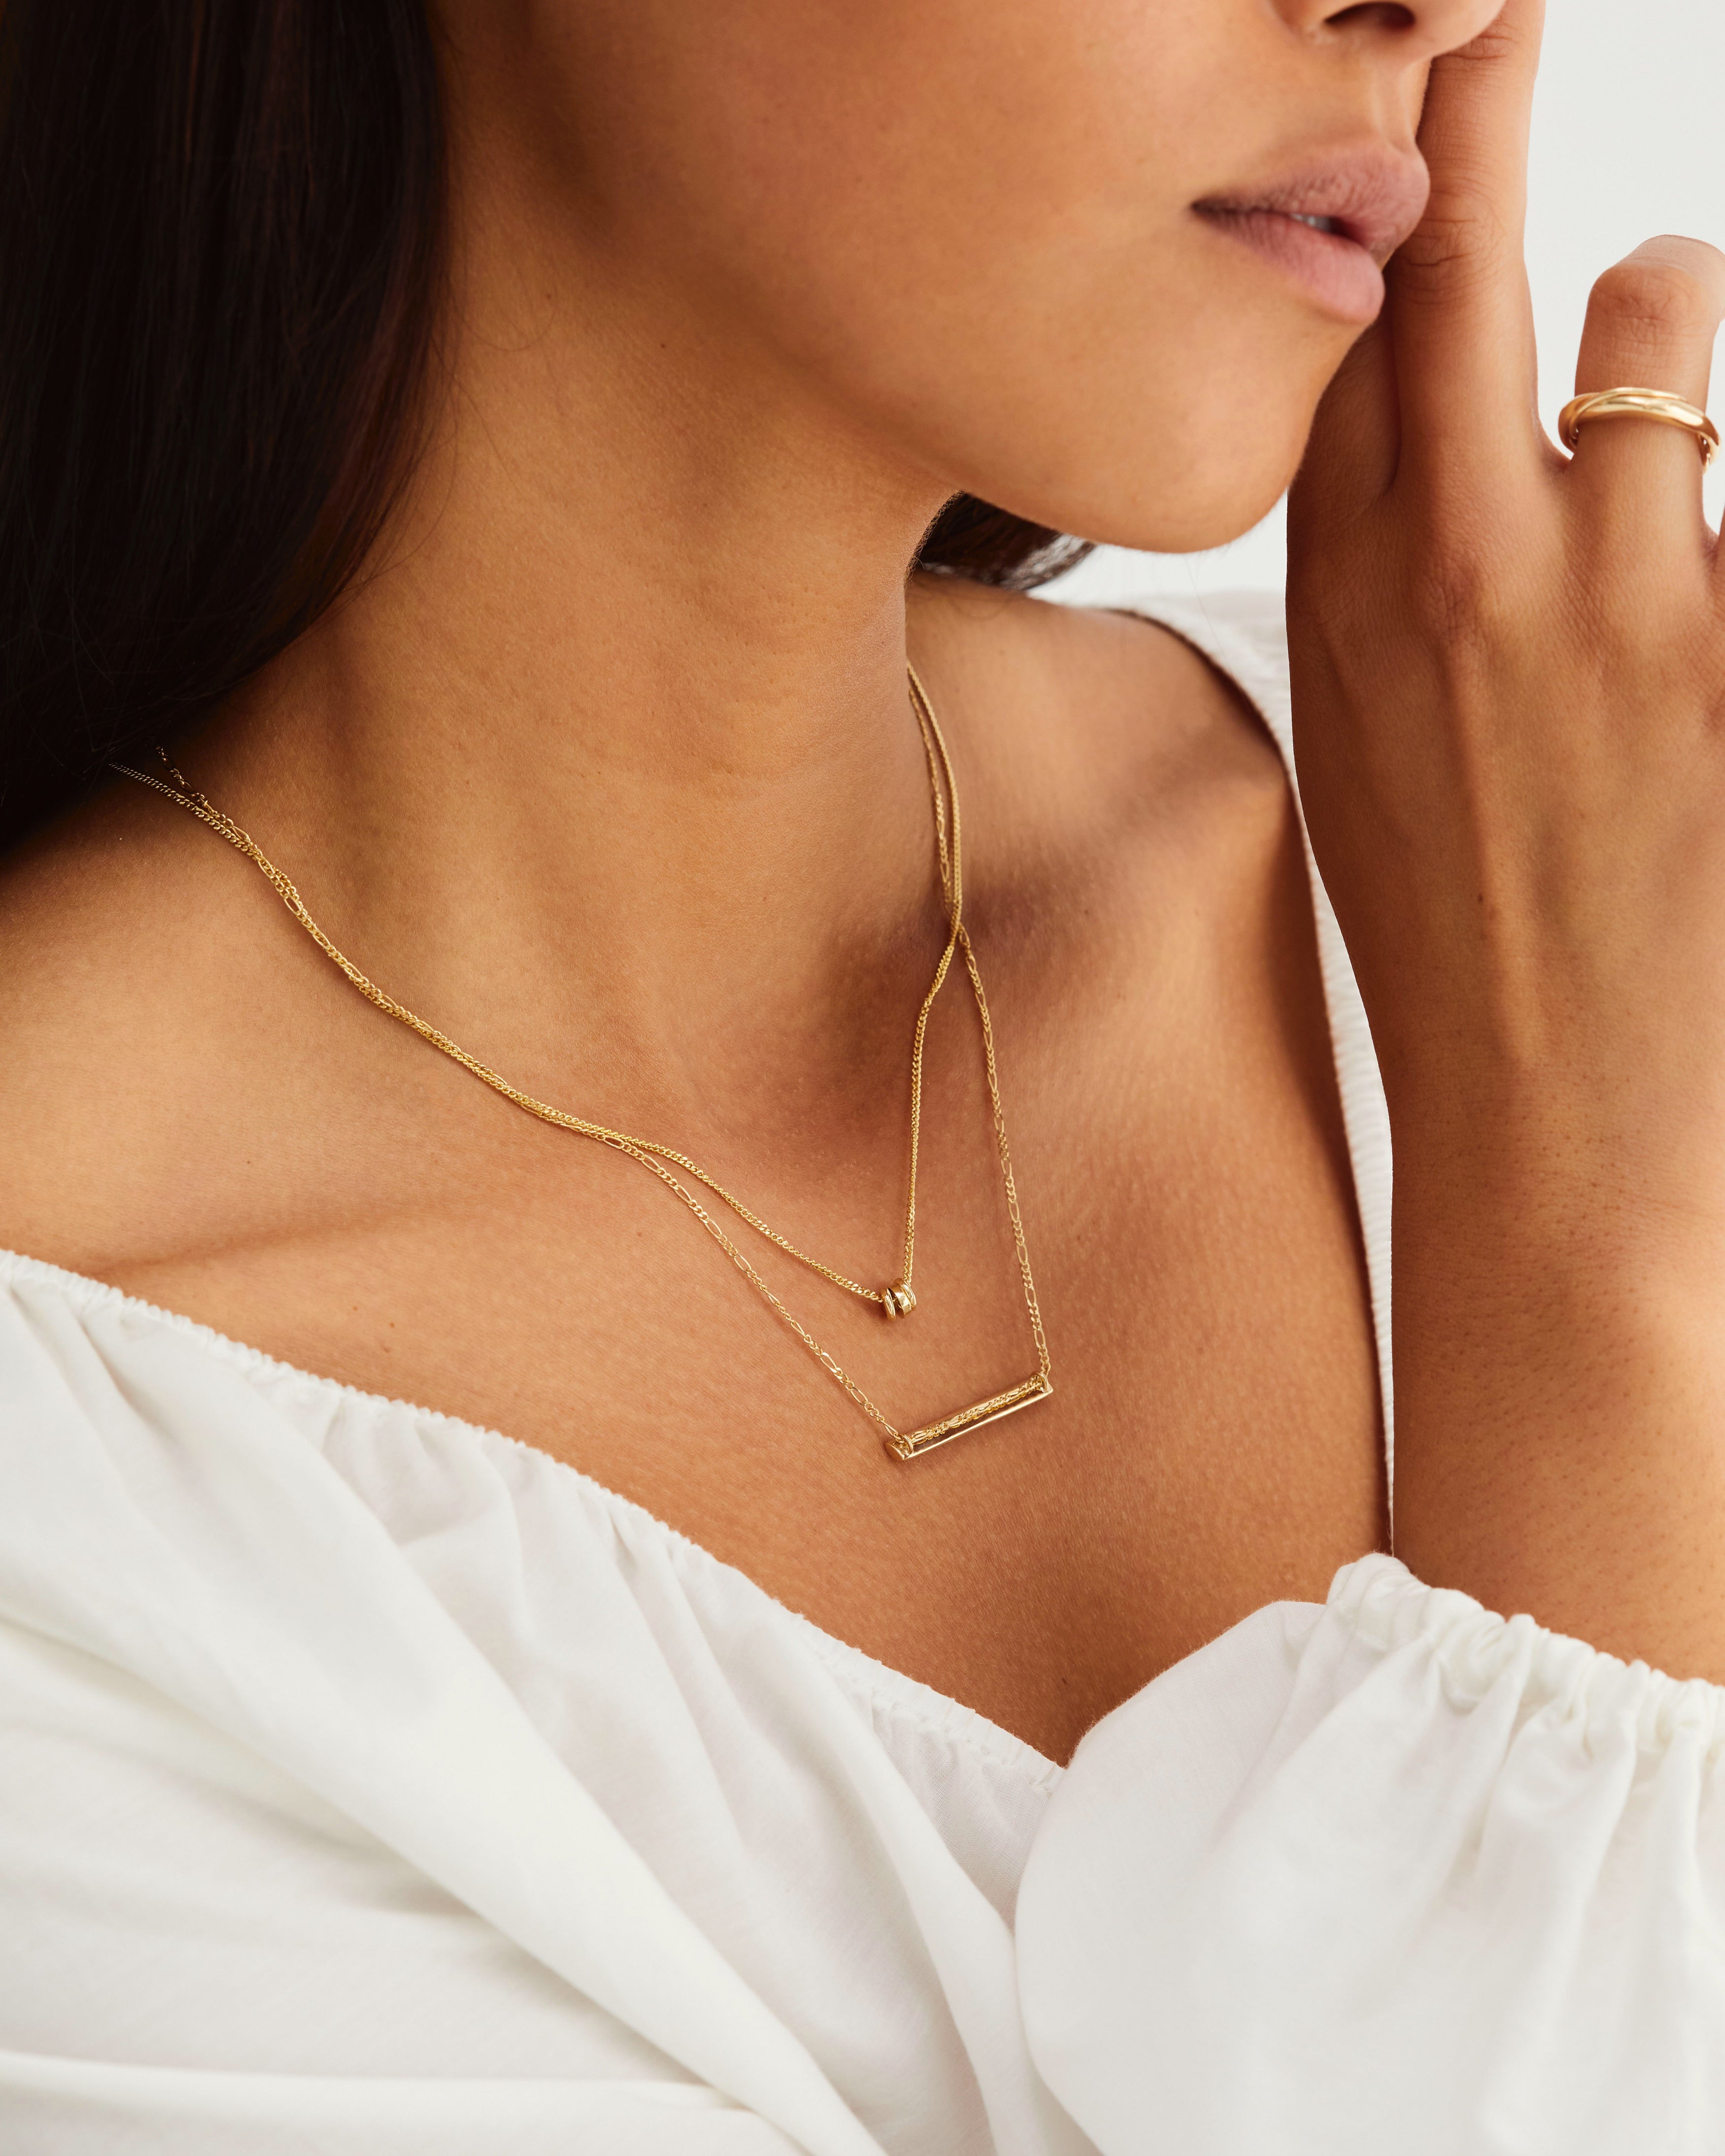 A model wears a bar shaped necklace on a detailed chain, layered with a small golden charm necklace